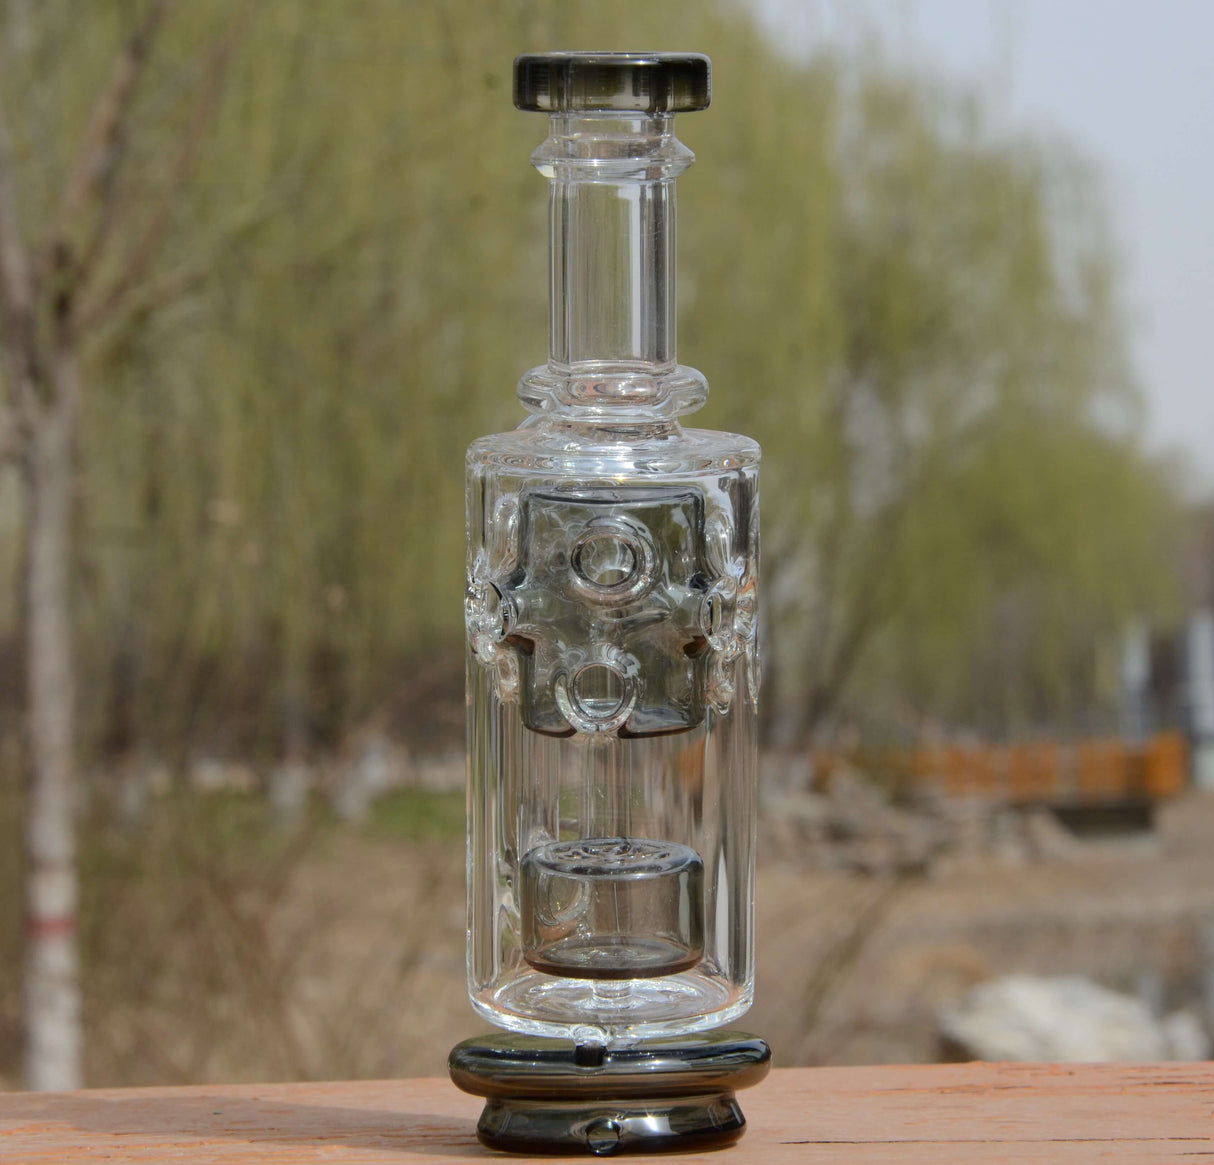 Calibear Straight Fab Puffco Attachment in clear glass, front view on wooden surface